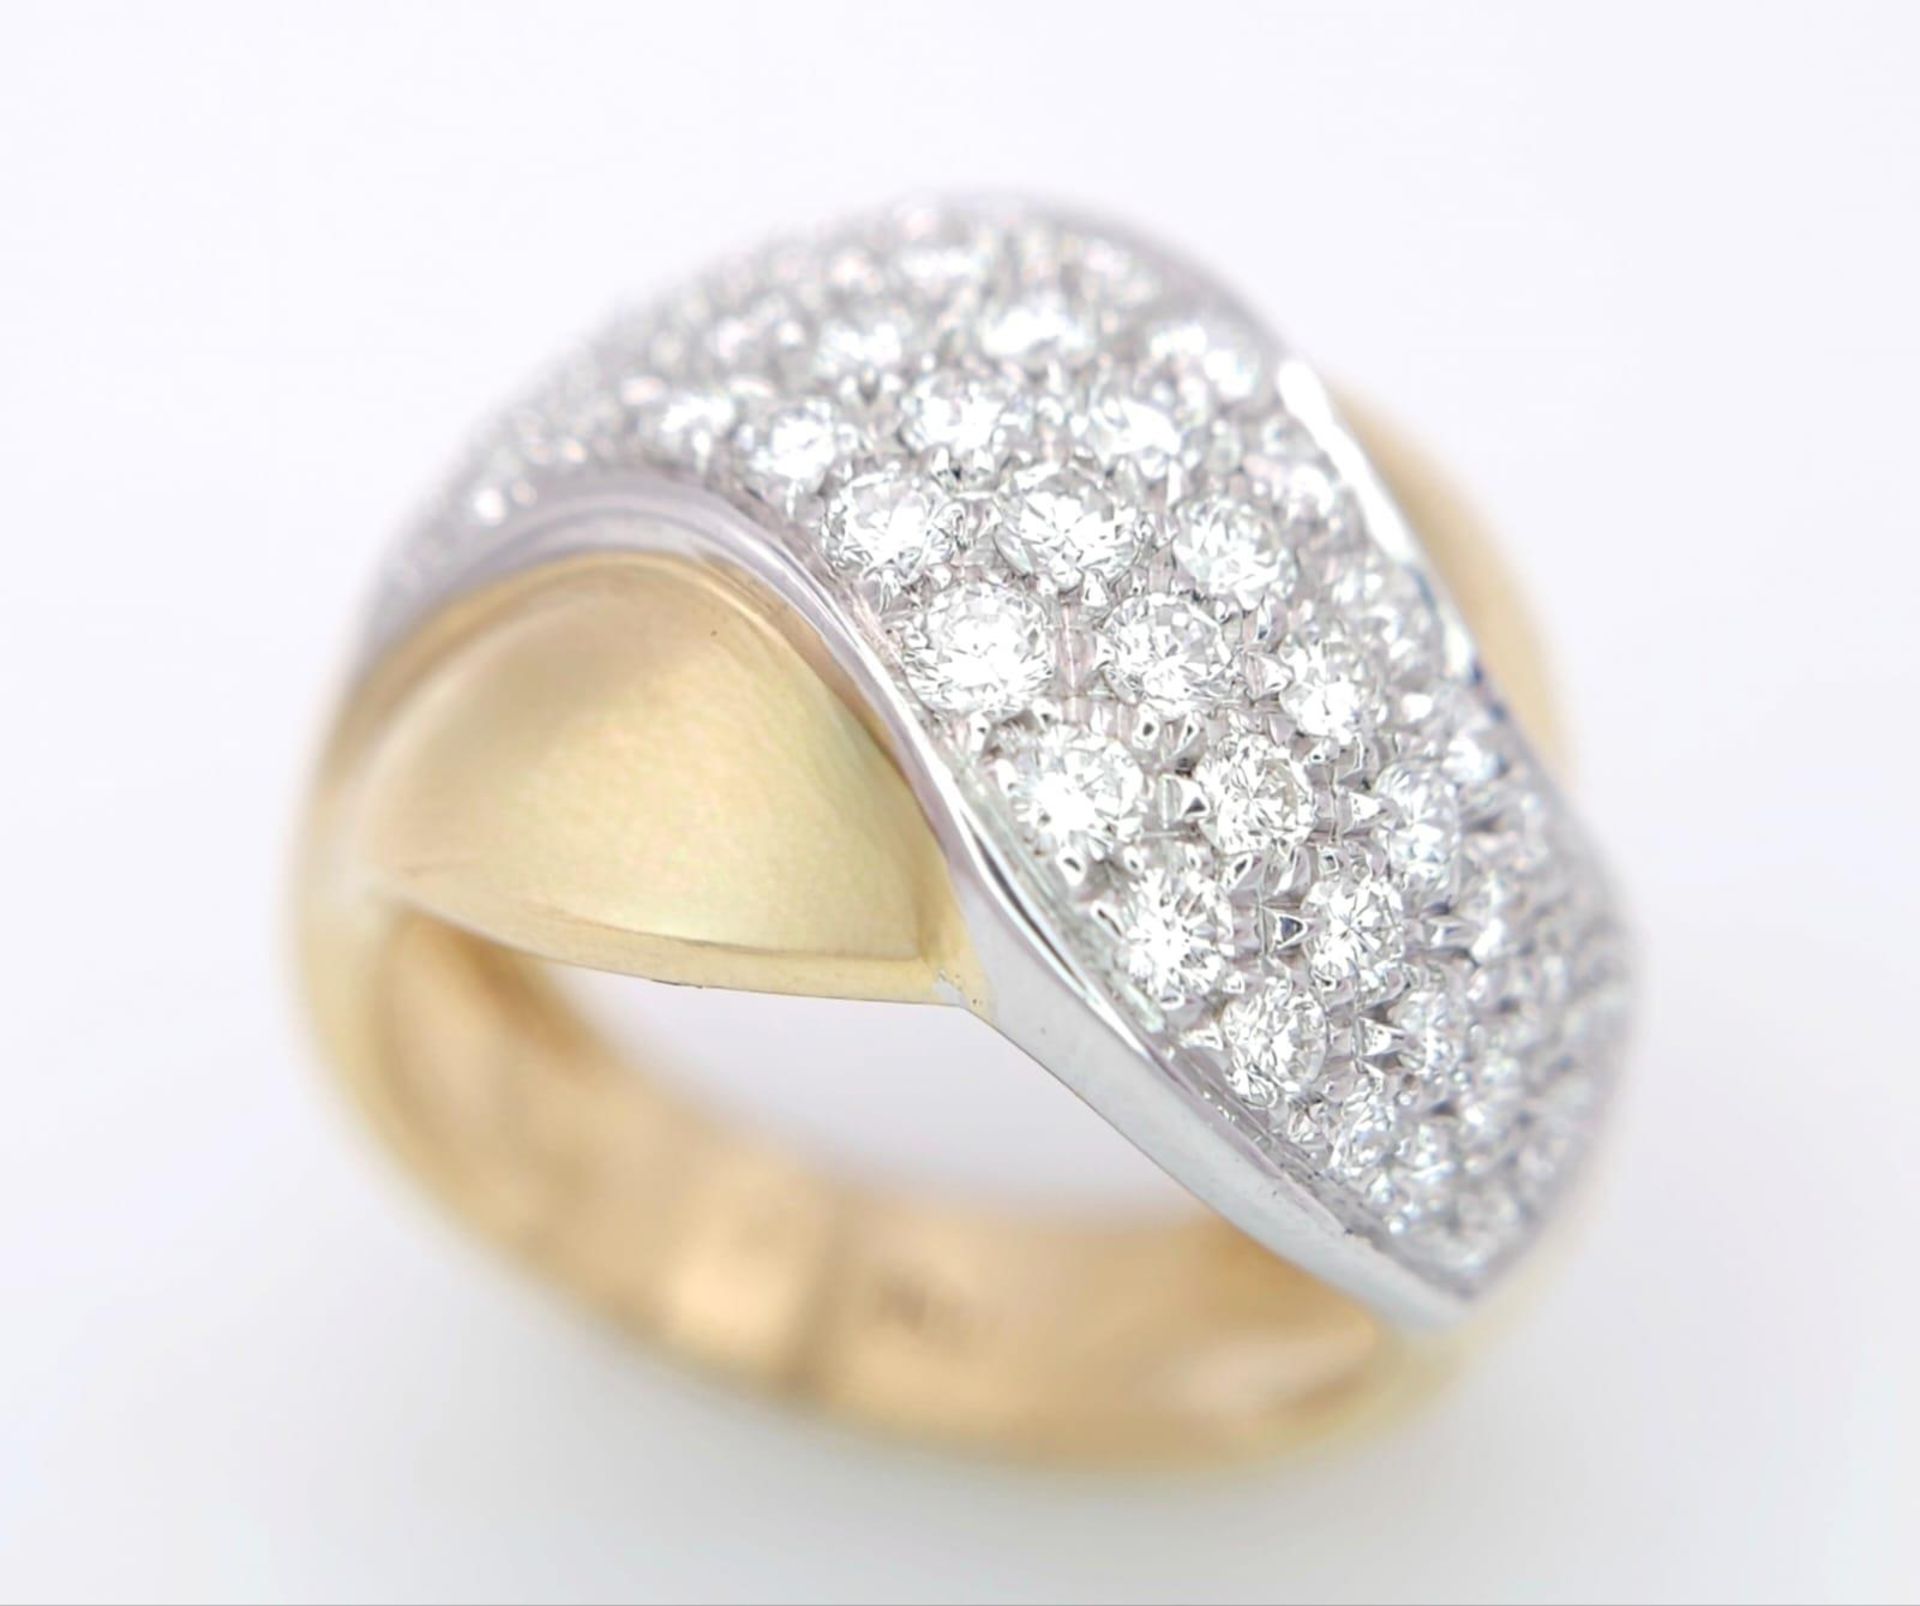 An 18K Yellow Gold Diamond Set Fancy Ring. 1.40ctw, Size N, 10.4g total weight. Ref: 2753 - Image 3 of 7